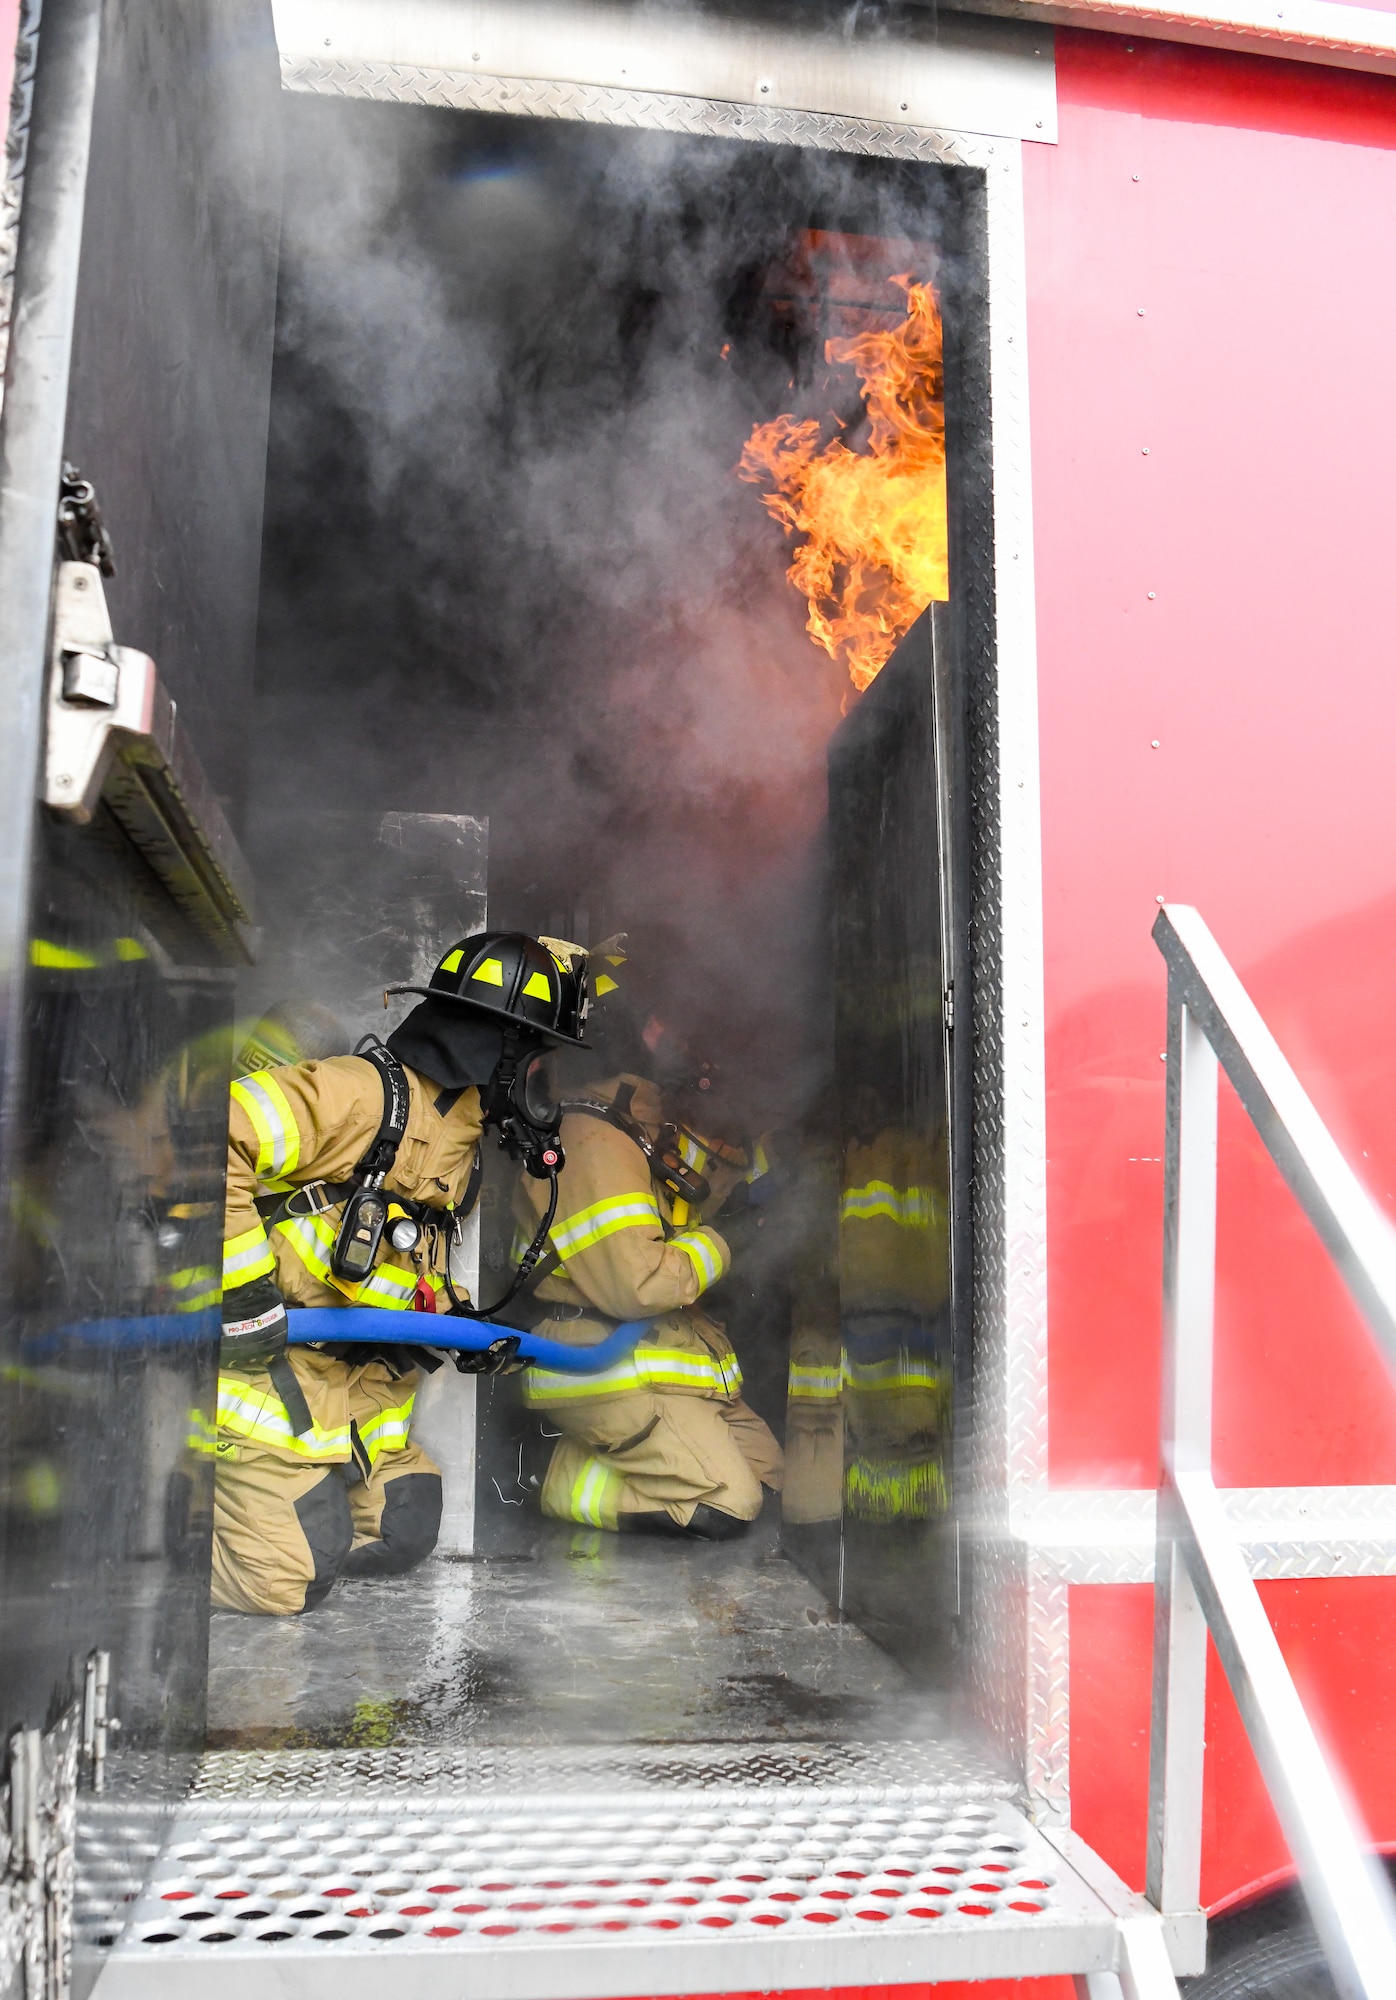 Firefighters in turnout gear on knees inside trailer with flames and simulated smoke